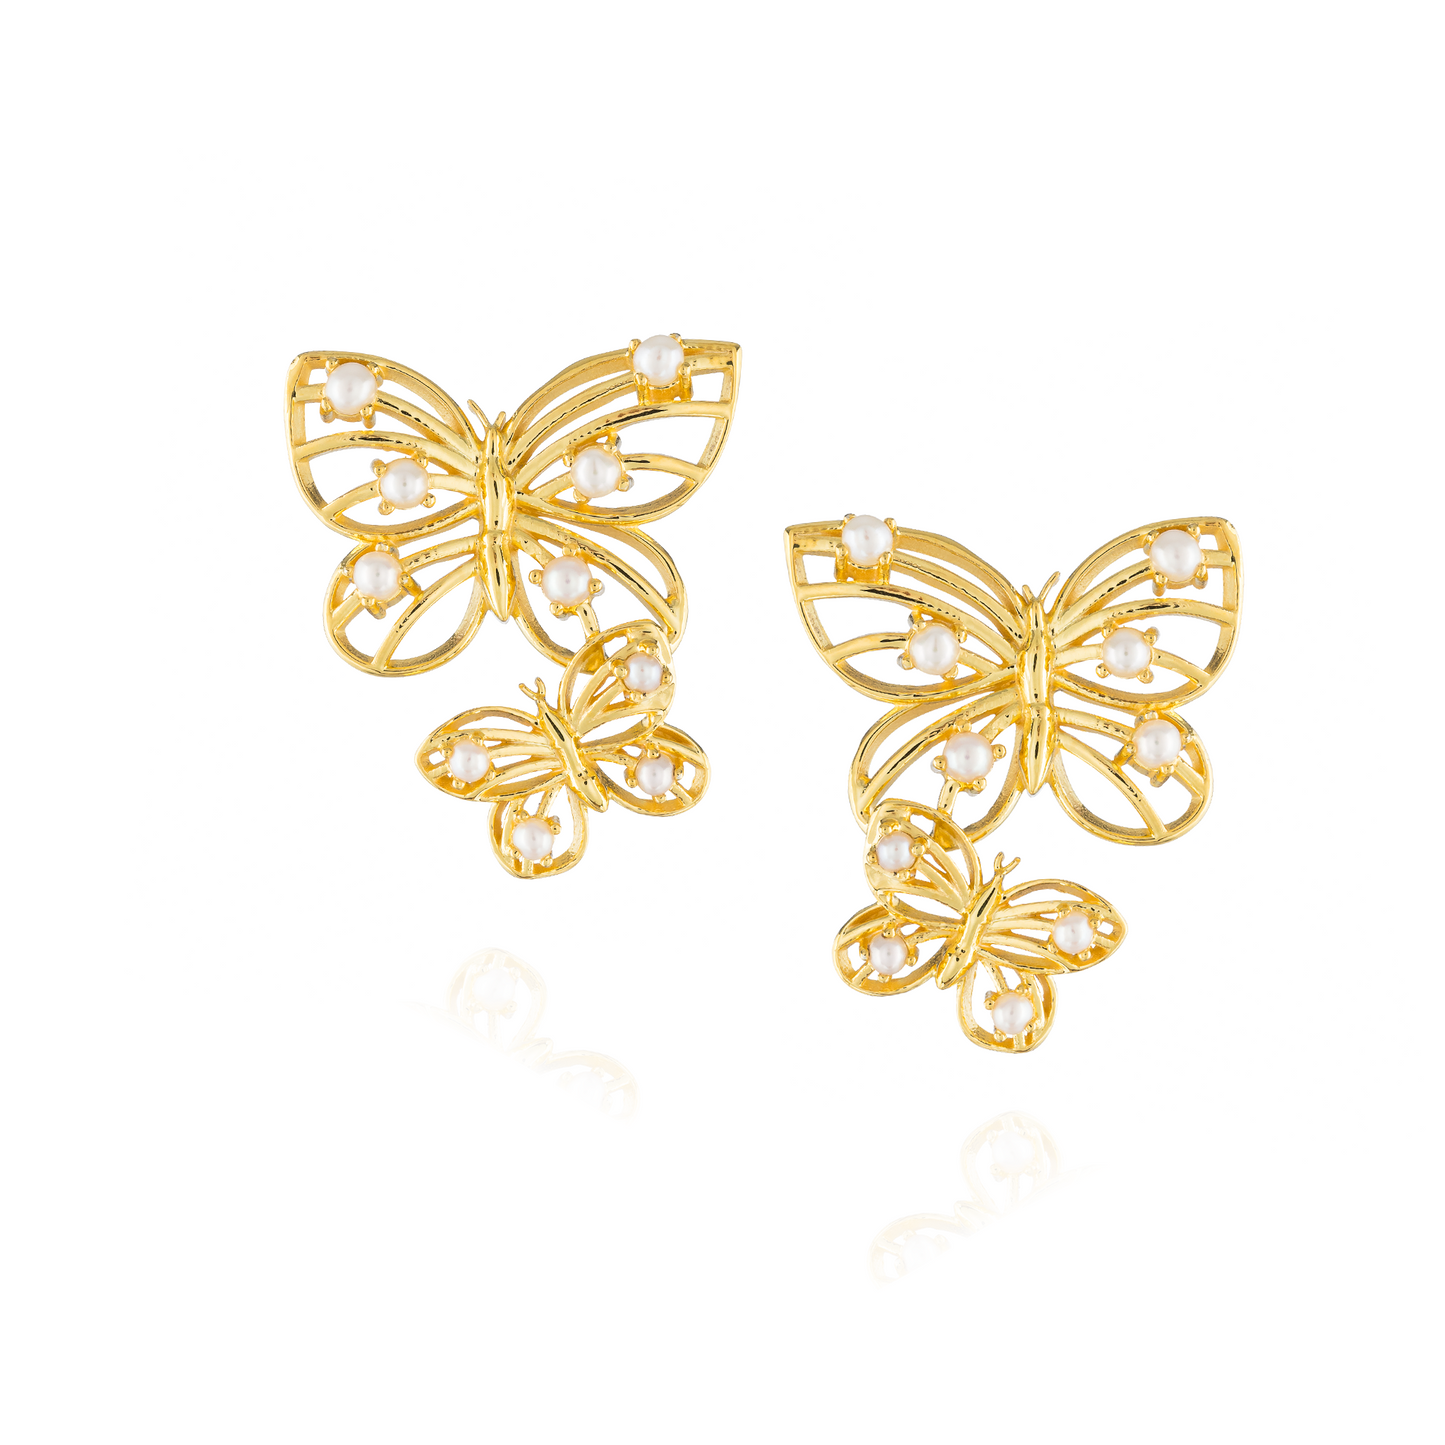 925 Silver Earrings plated in 18k Yellow Gold with Pearl Cabouchon